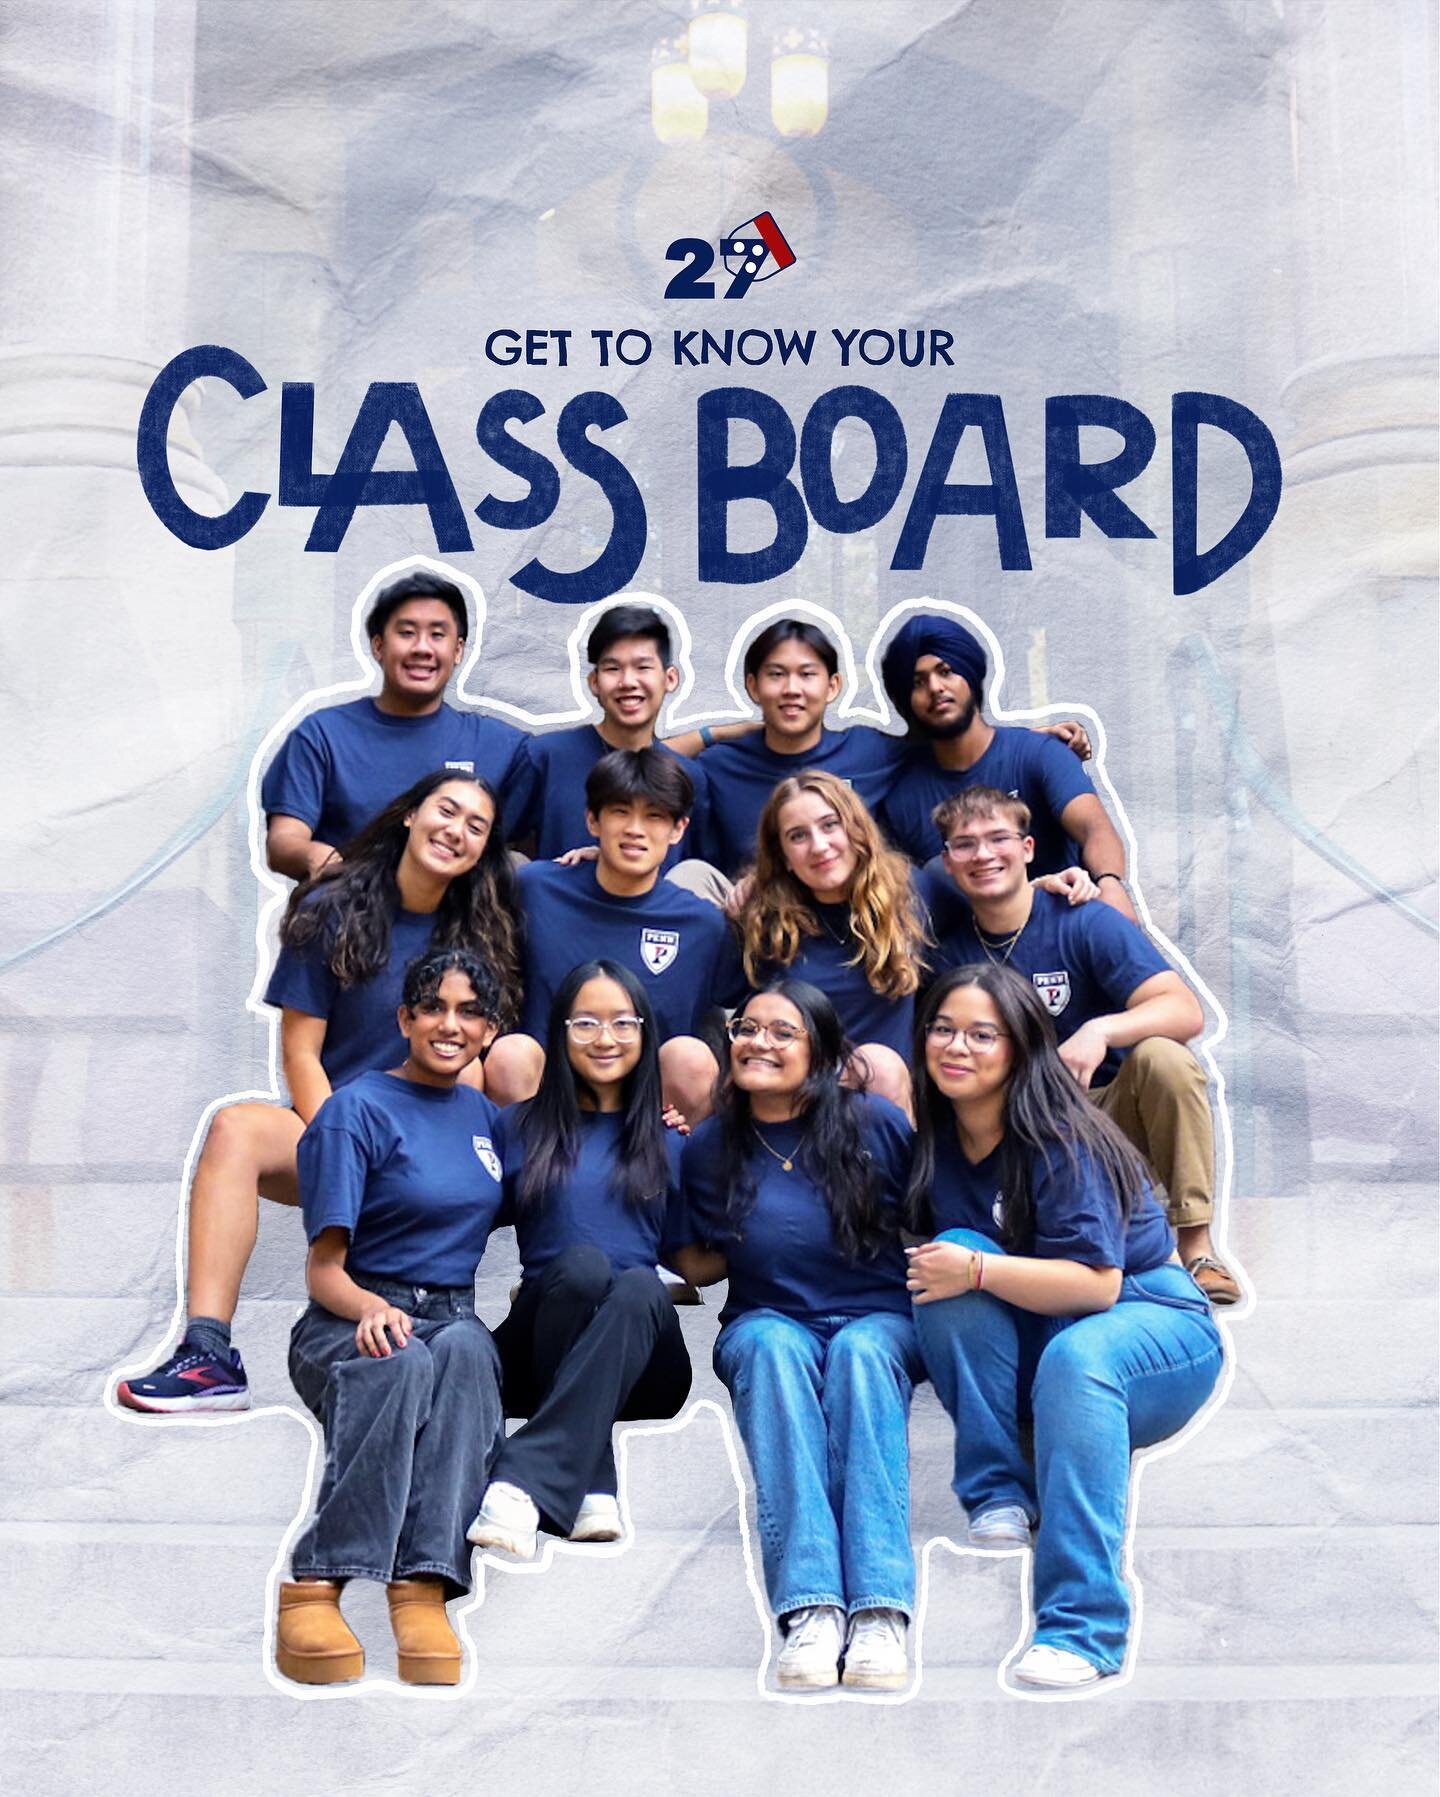 You&rsquo;ve seen us at a couple events already&hellip; now it&rsquo;s time to get up close and personal with our Class Board!